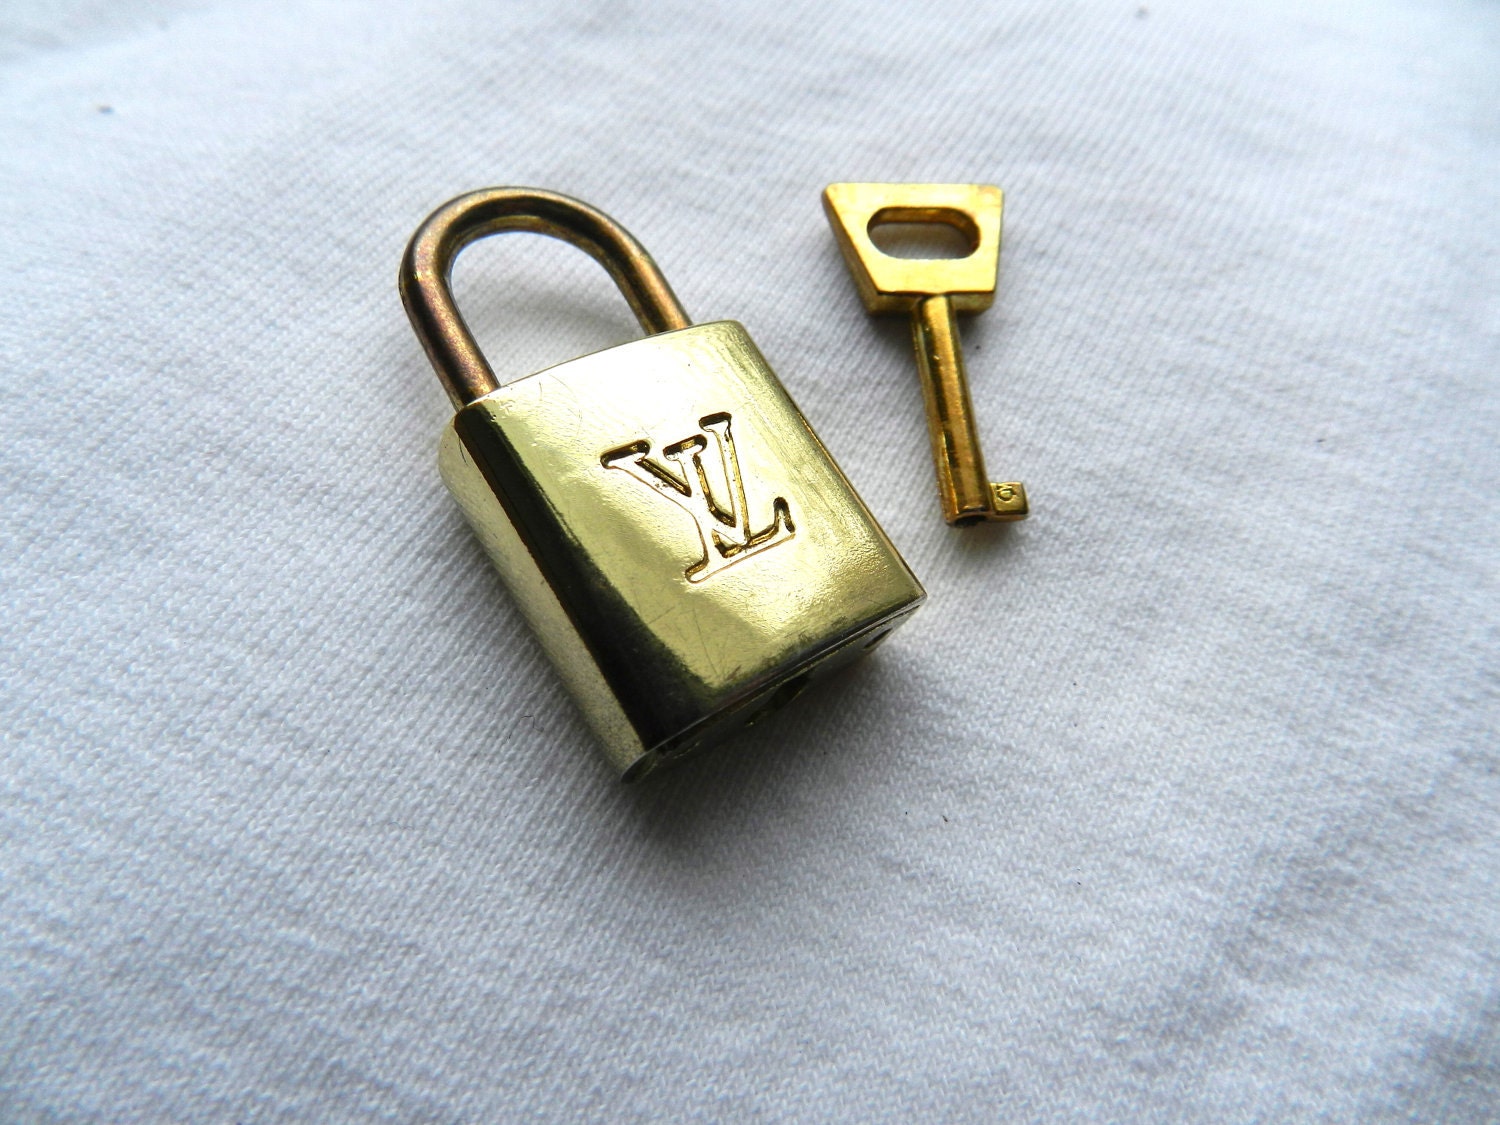 Vintage Louis Vuitton lock and key for purse  Vintage louis vuitton, Louis  vuitton, Lock and key